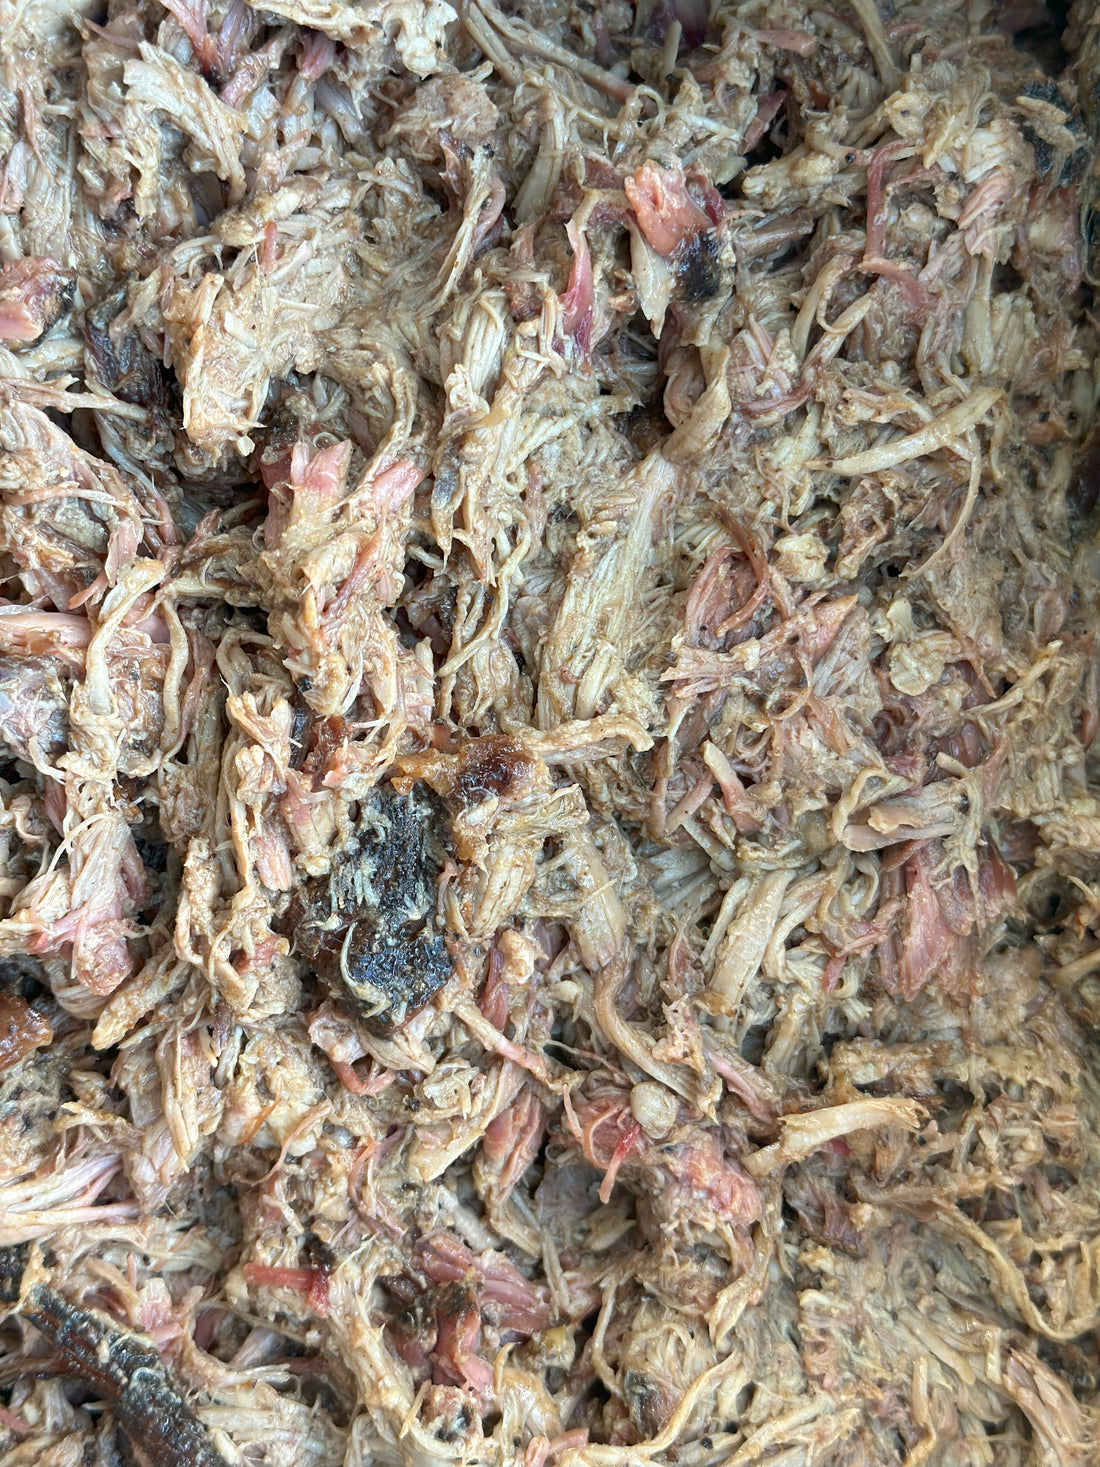 Dr. Pepper and Chipotle Adobo Pulled Pork!